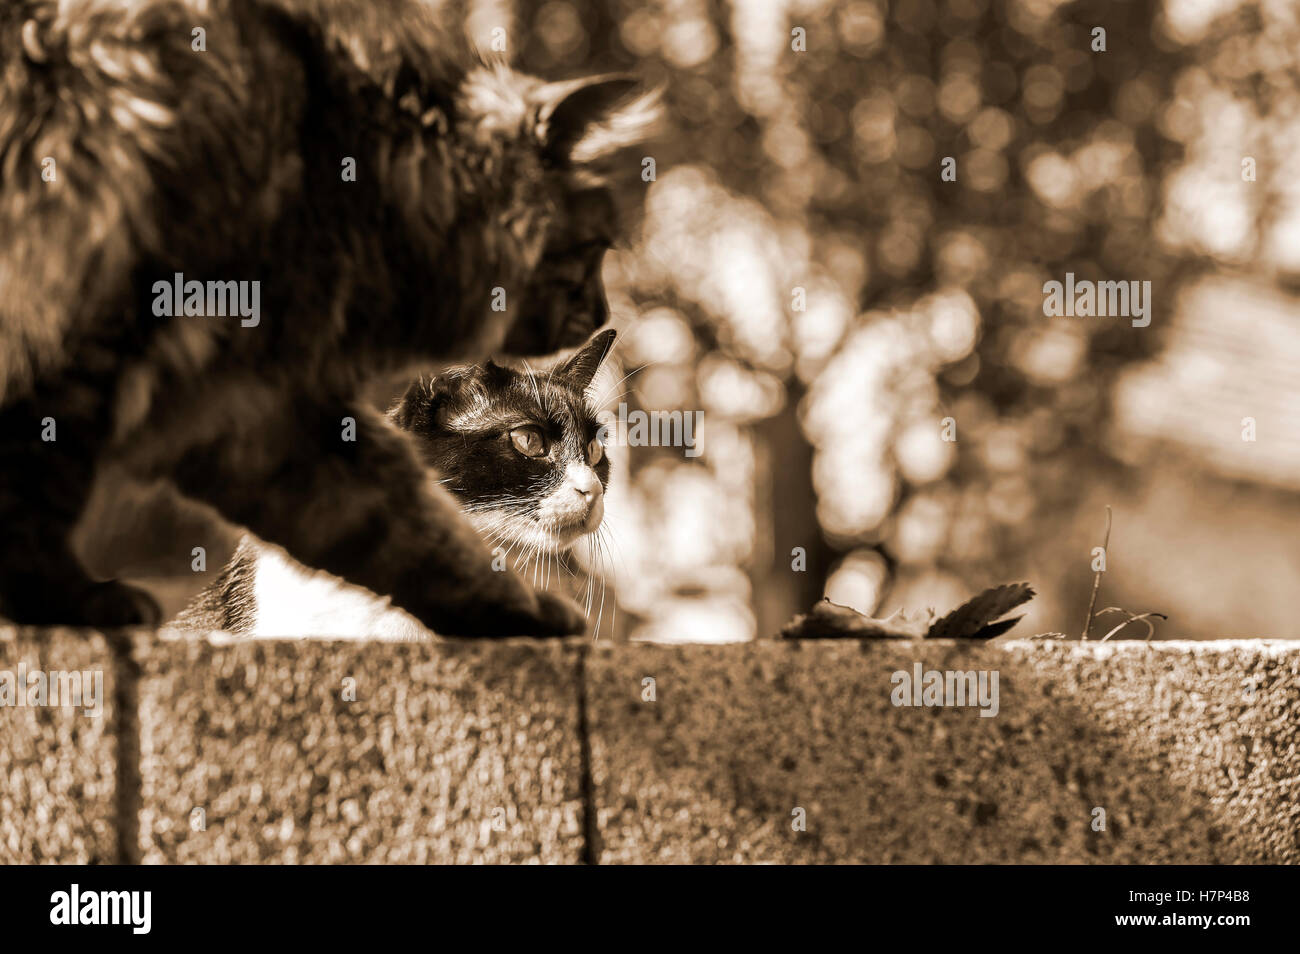 Two cats are looking at something. Stock Photo